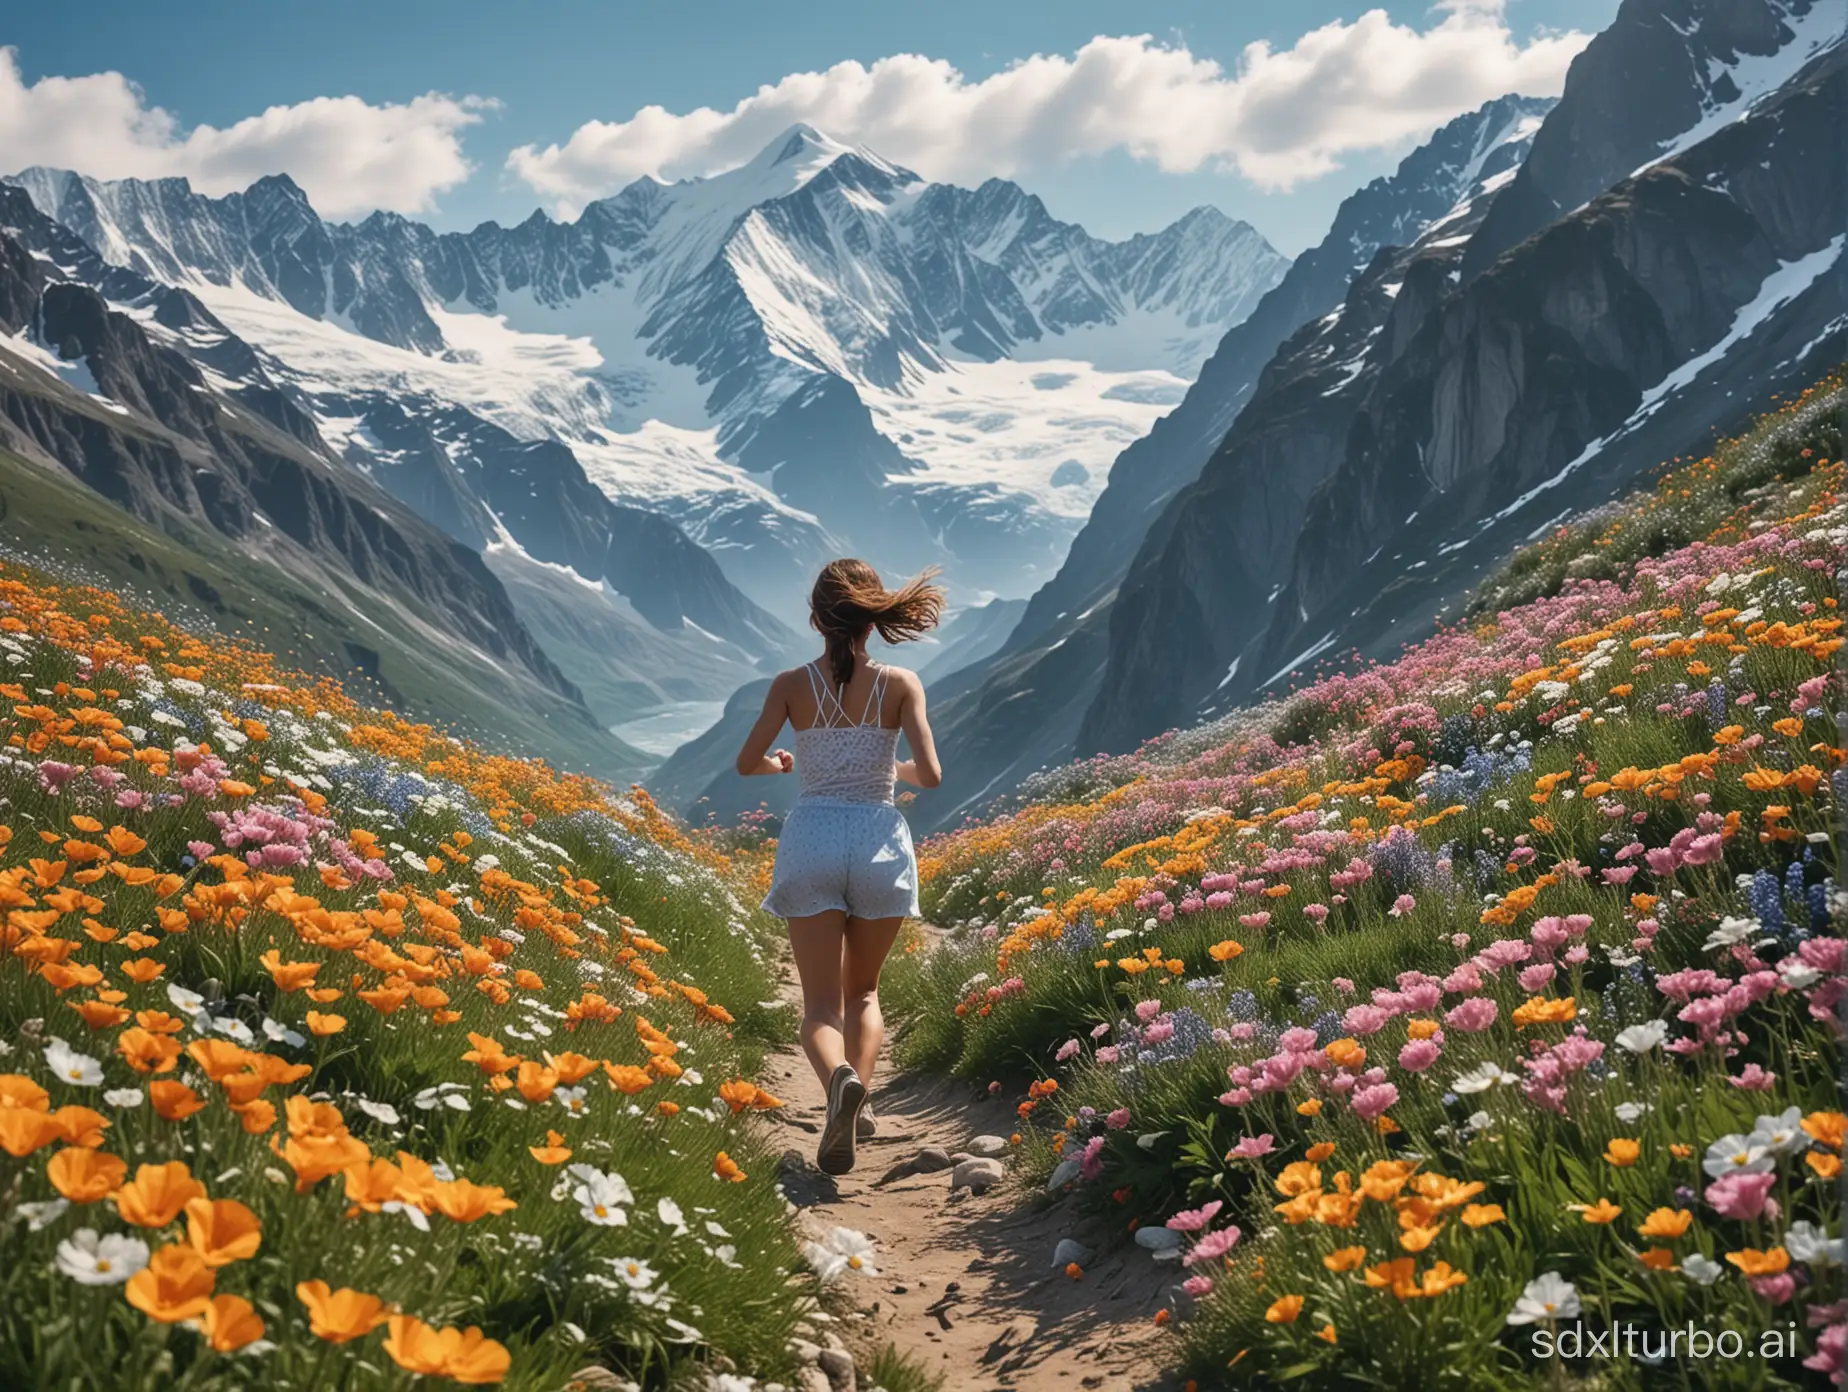 Beneath the majestic snow-capped mountains, amid the boundless sea of flowers, a beautiful girl is running, captured by a telephoto lens.